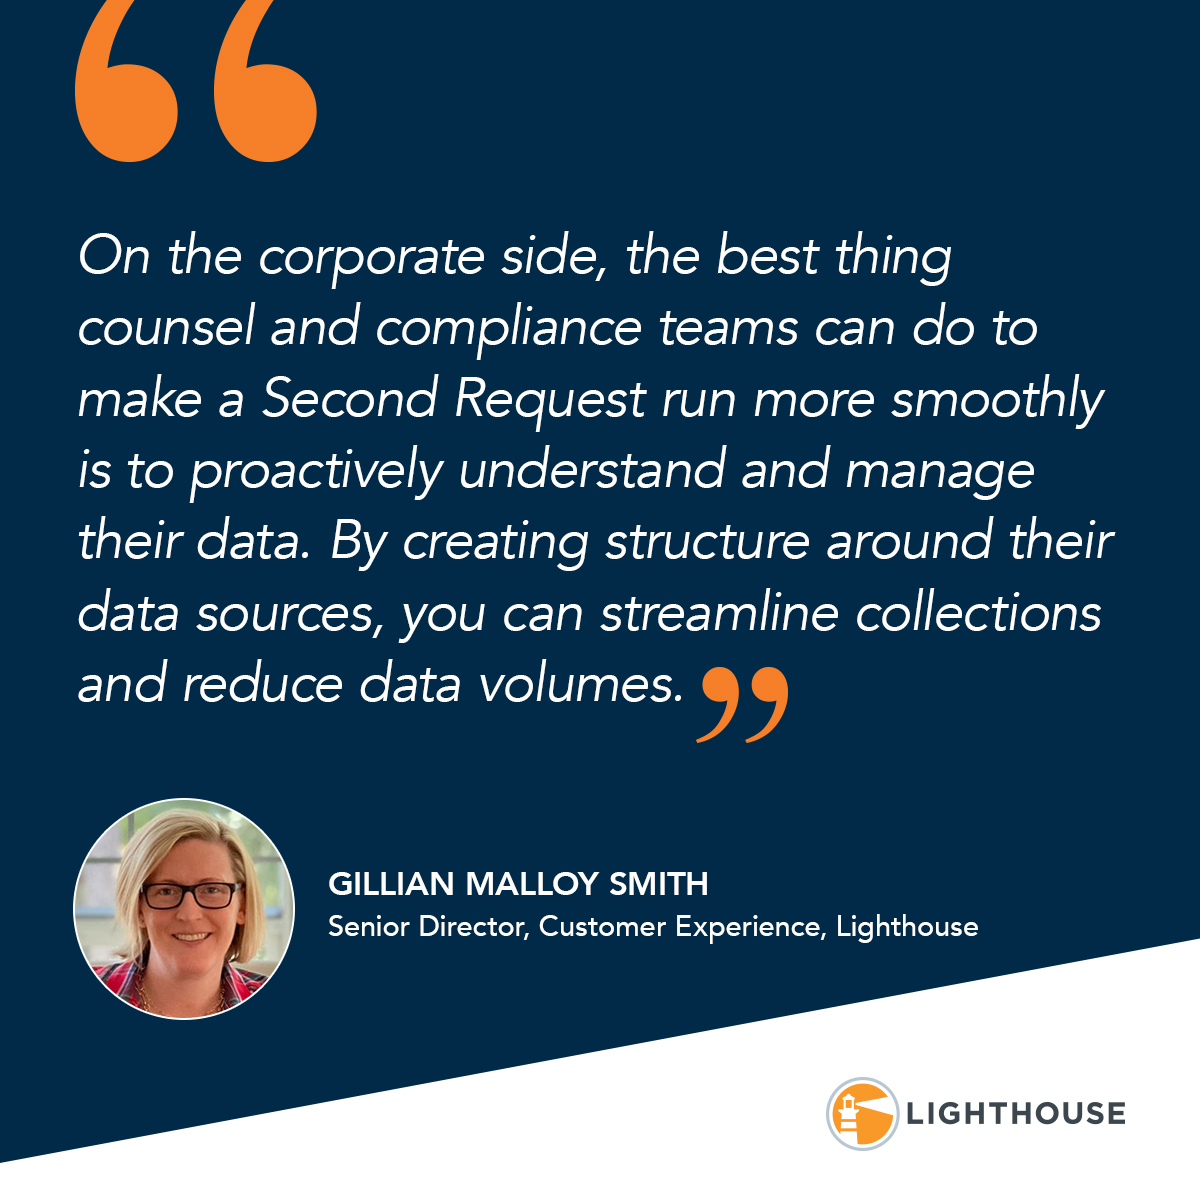 In our Second Request trends report, Lighthouse’s Gillian Malloy Smith explains how in-house counsel can prepare for Second Requests in today’s data and regulatory environment: ow.ly/tFTc50RcJp3

#antitrust #eDiscovery #inhousecounsel